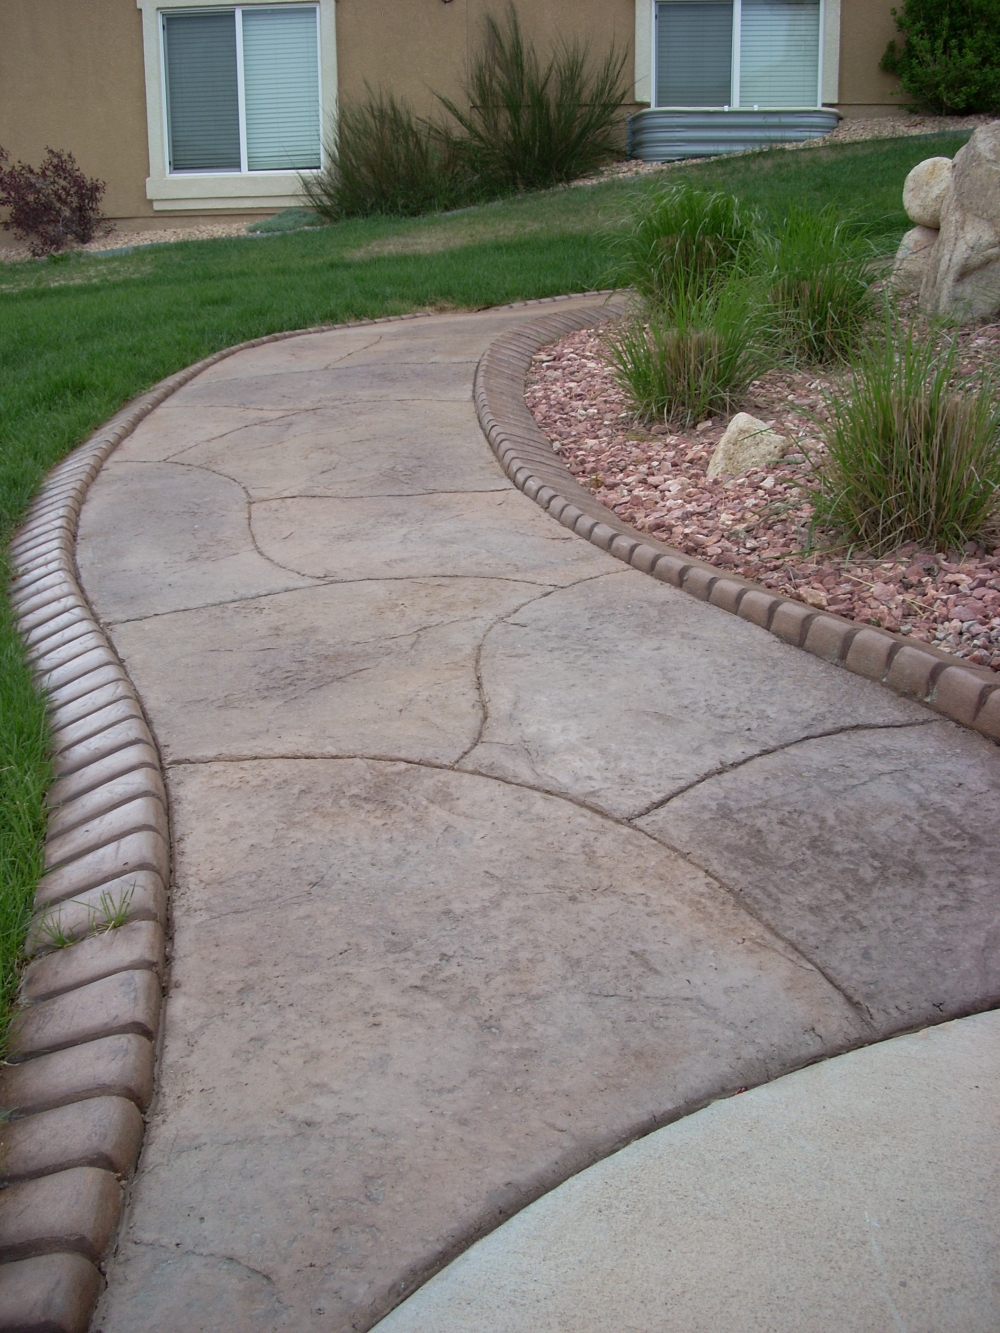 Walkway of Stamped Concrete with Edging